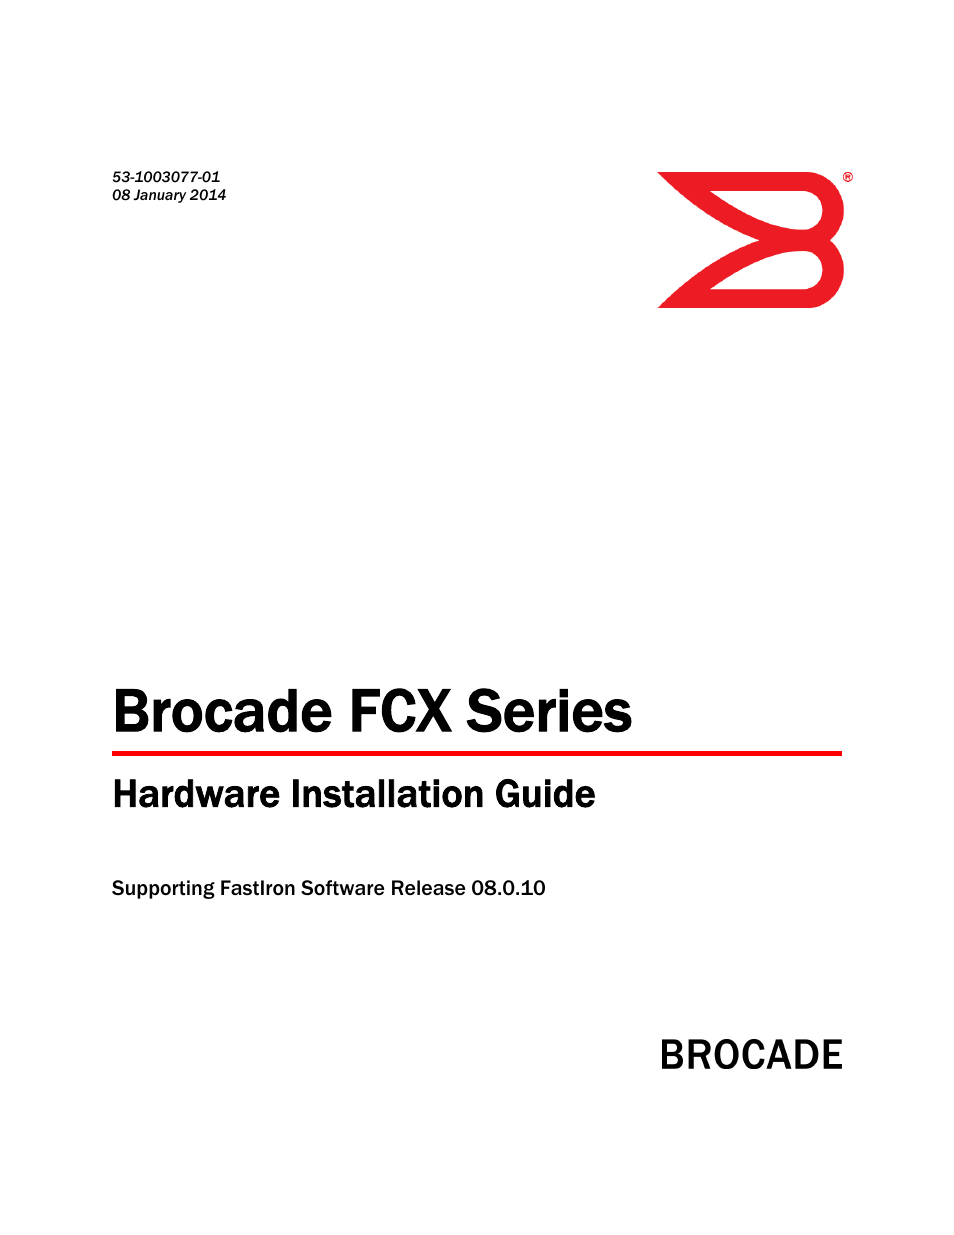 Brocade FCX Series Hardware Installation Guide User Manual | 112 pages